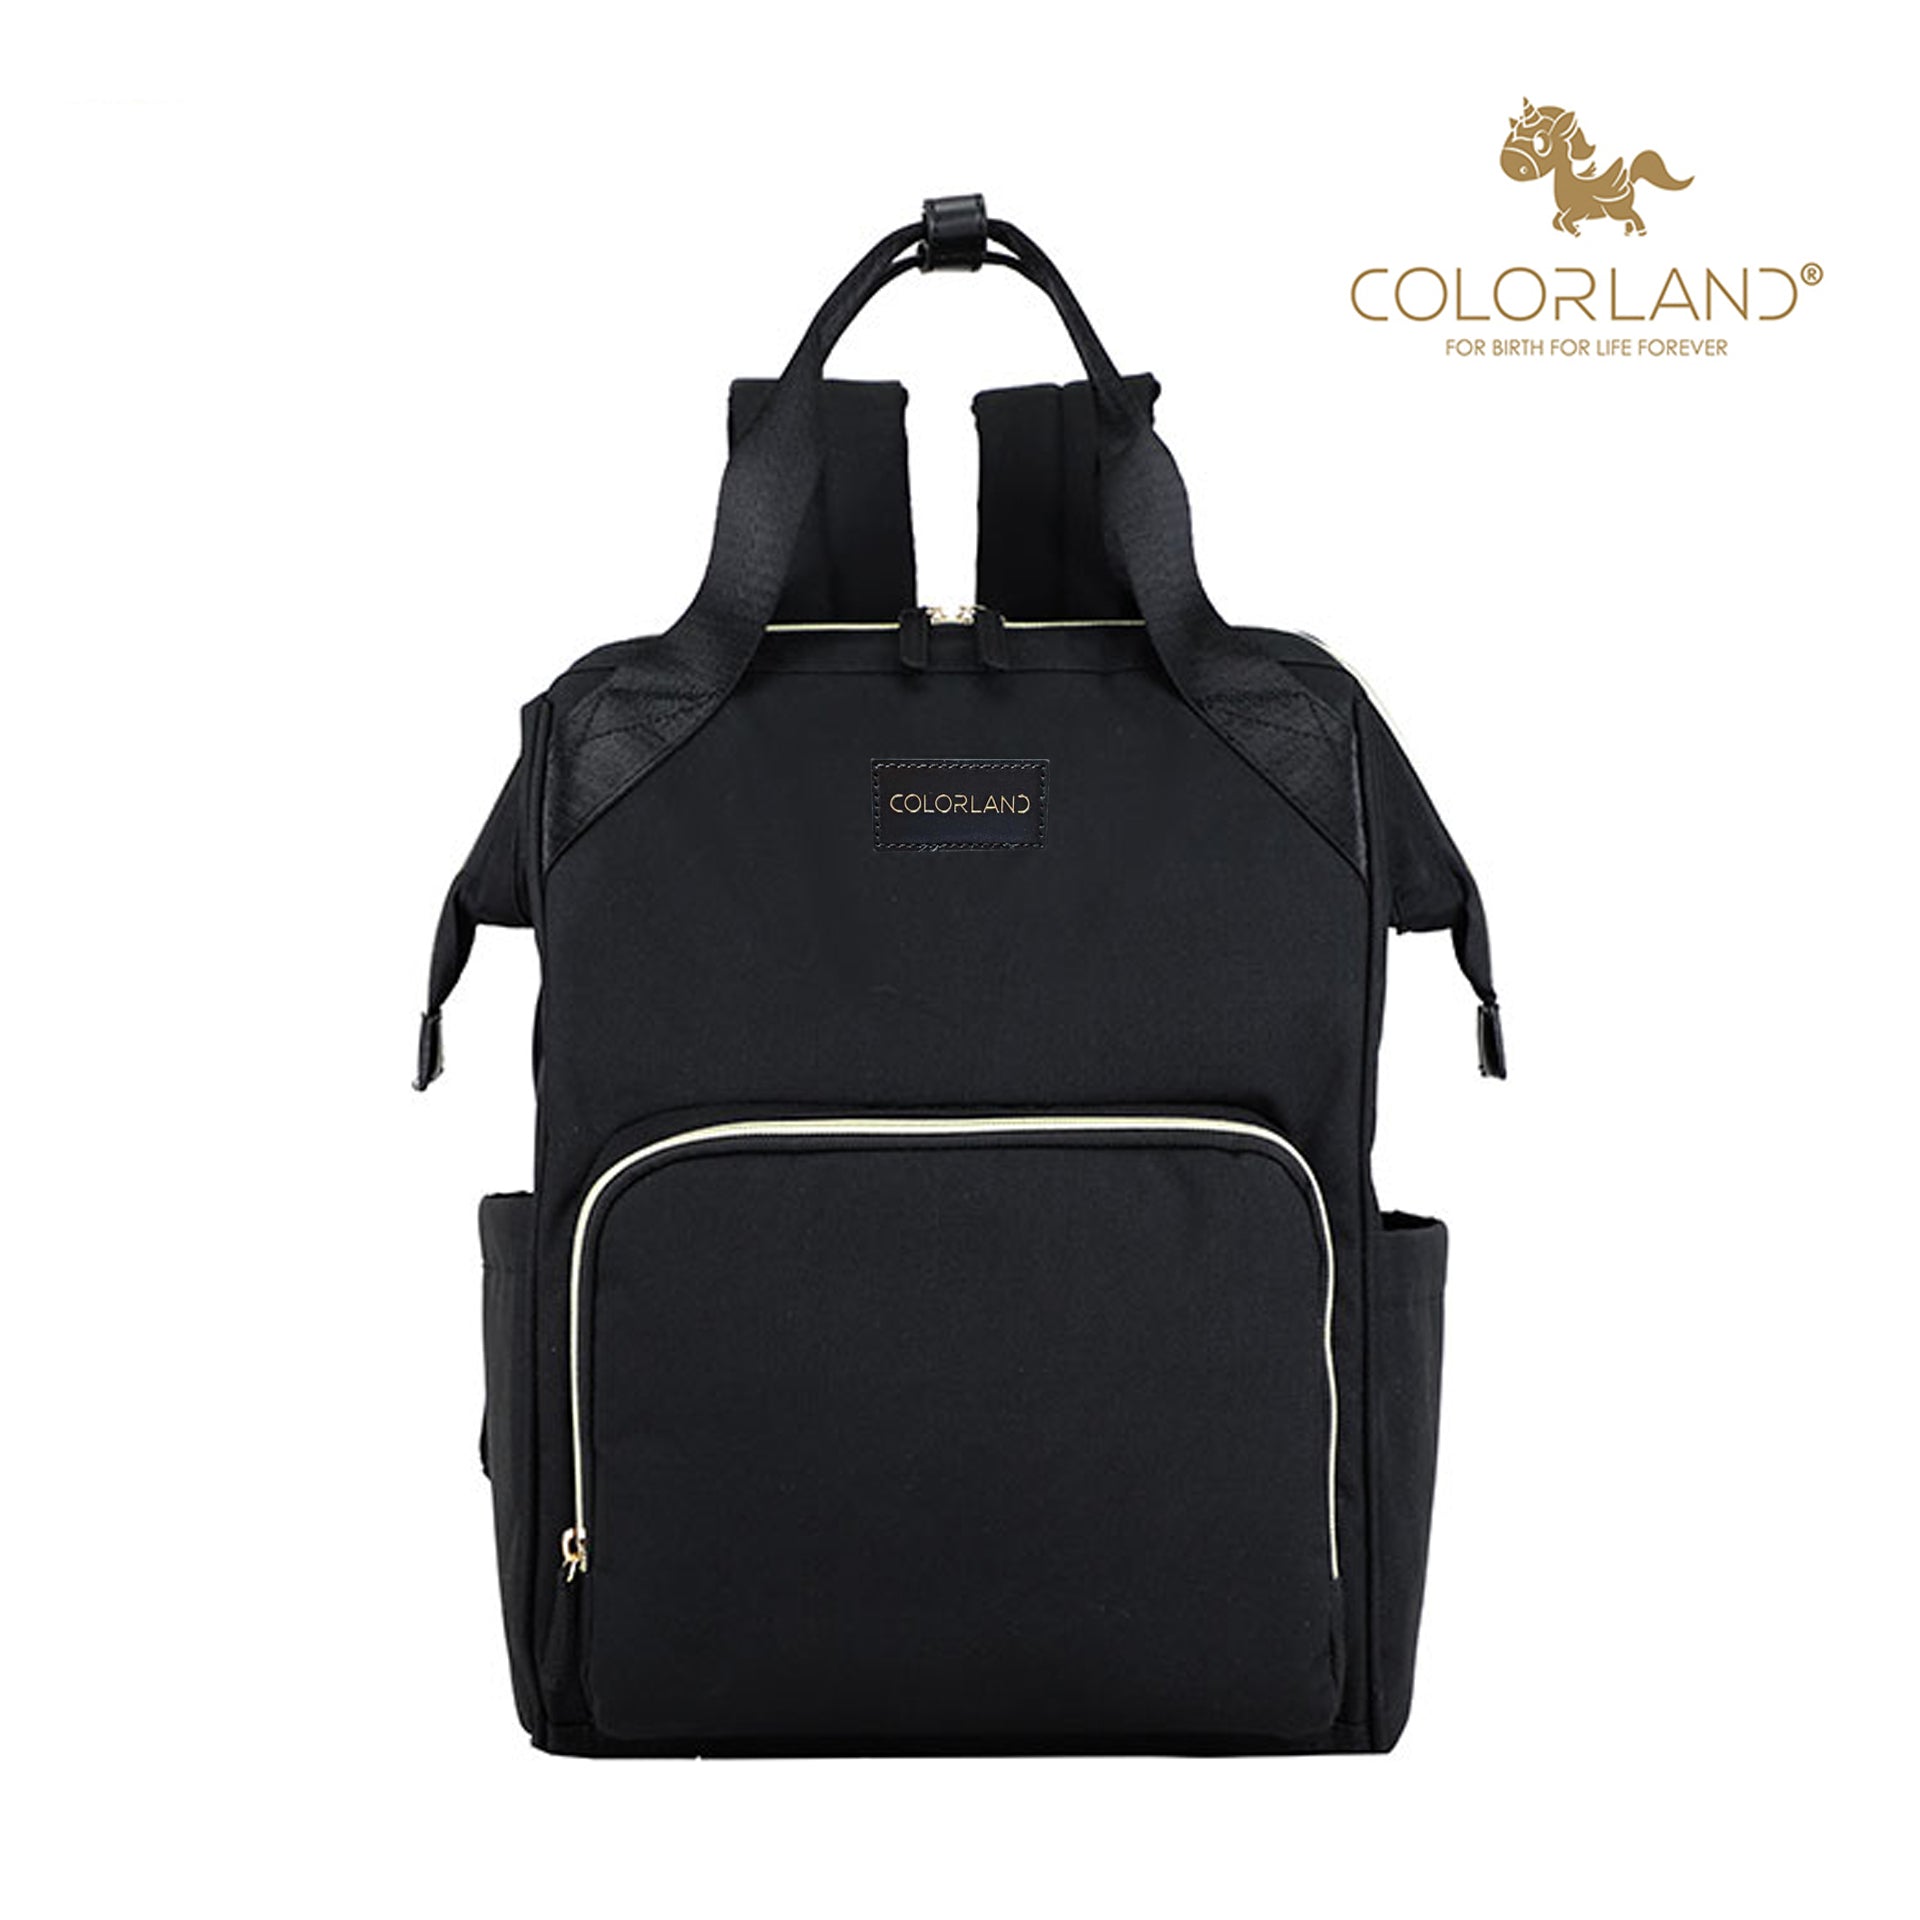 Colorland Mommy Diaper Backpack (BP156-A/Black)